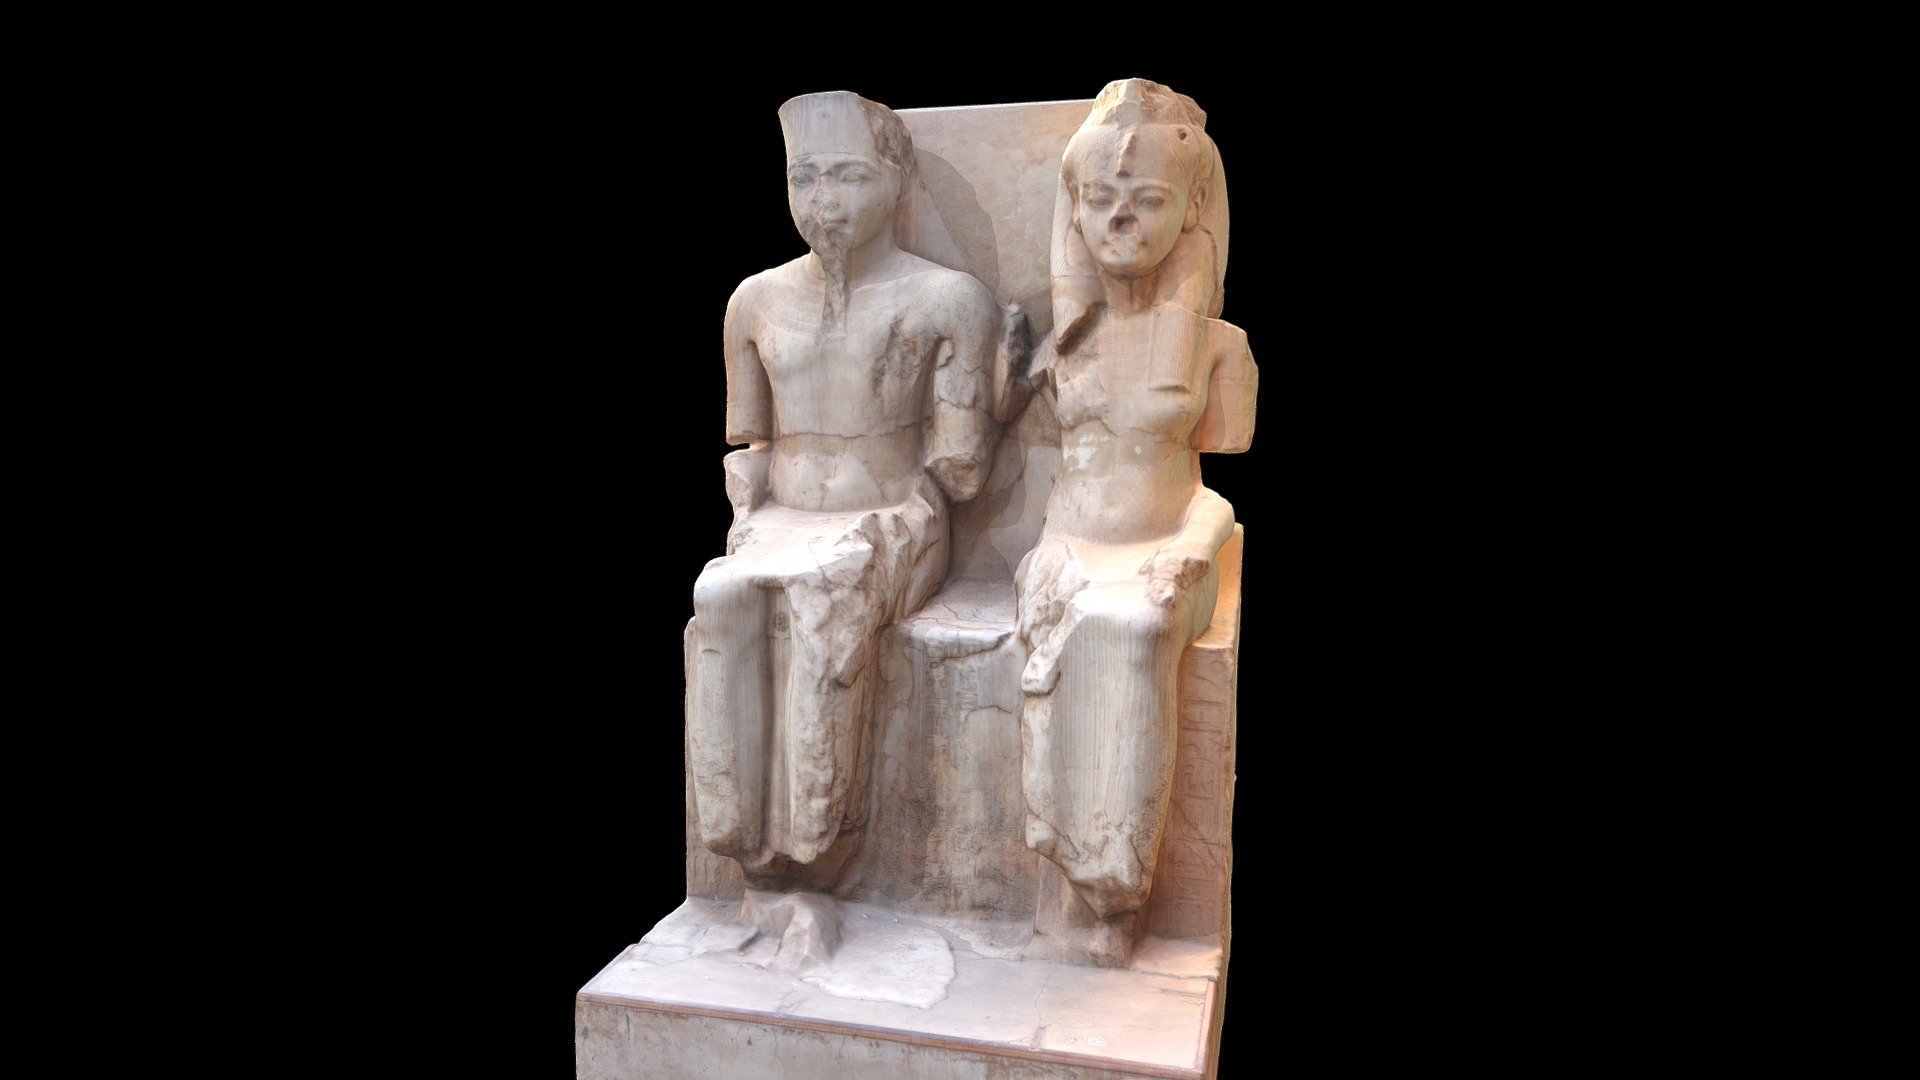 Dyad of Tutankhamen and his queen Ankhesenpaaten in the form of the god Amun and goddess Mut.  Luxor Temple, Luxor, Egypt.

This dyad statue in calcite/alabaster was originally carved in the 18th Dynasty with the features of Tutankhamen and his queen.  The staute was later usurped by Rameses II at which time the names were recut to his cartouches.

Created from 106 photographs (Canon EOS Rebel T7i).  Minor repairs to the tops of the heads and top of back made with Blender 2.8 3d model